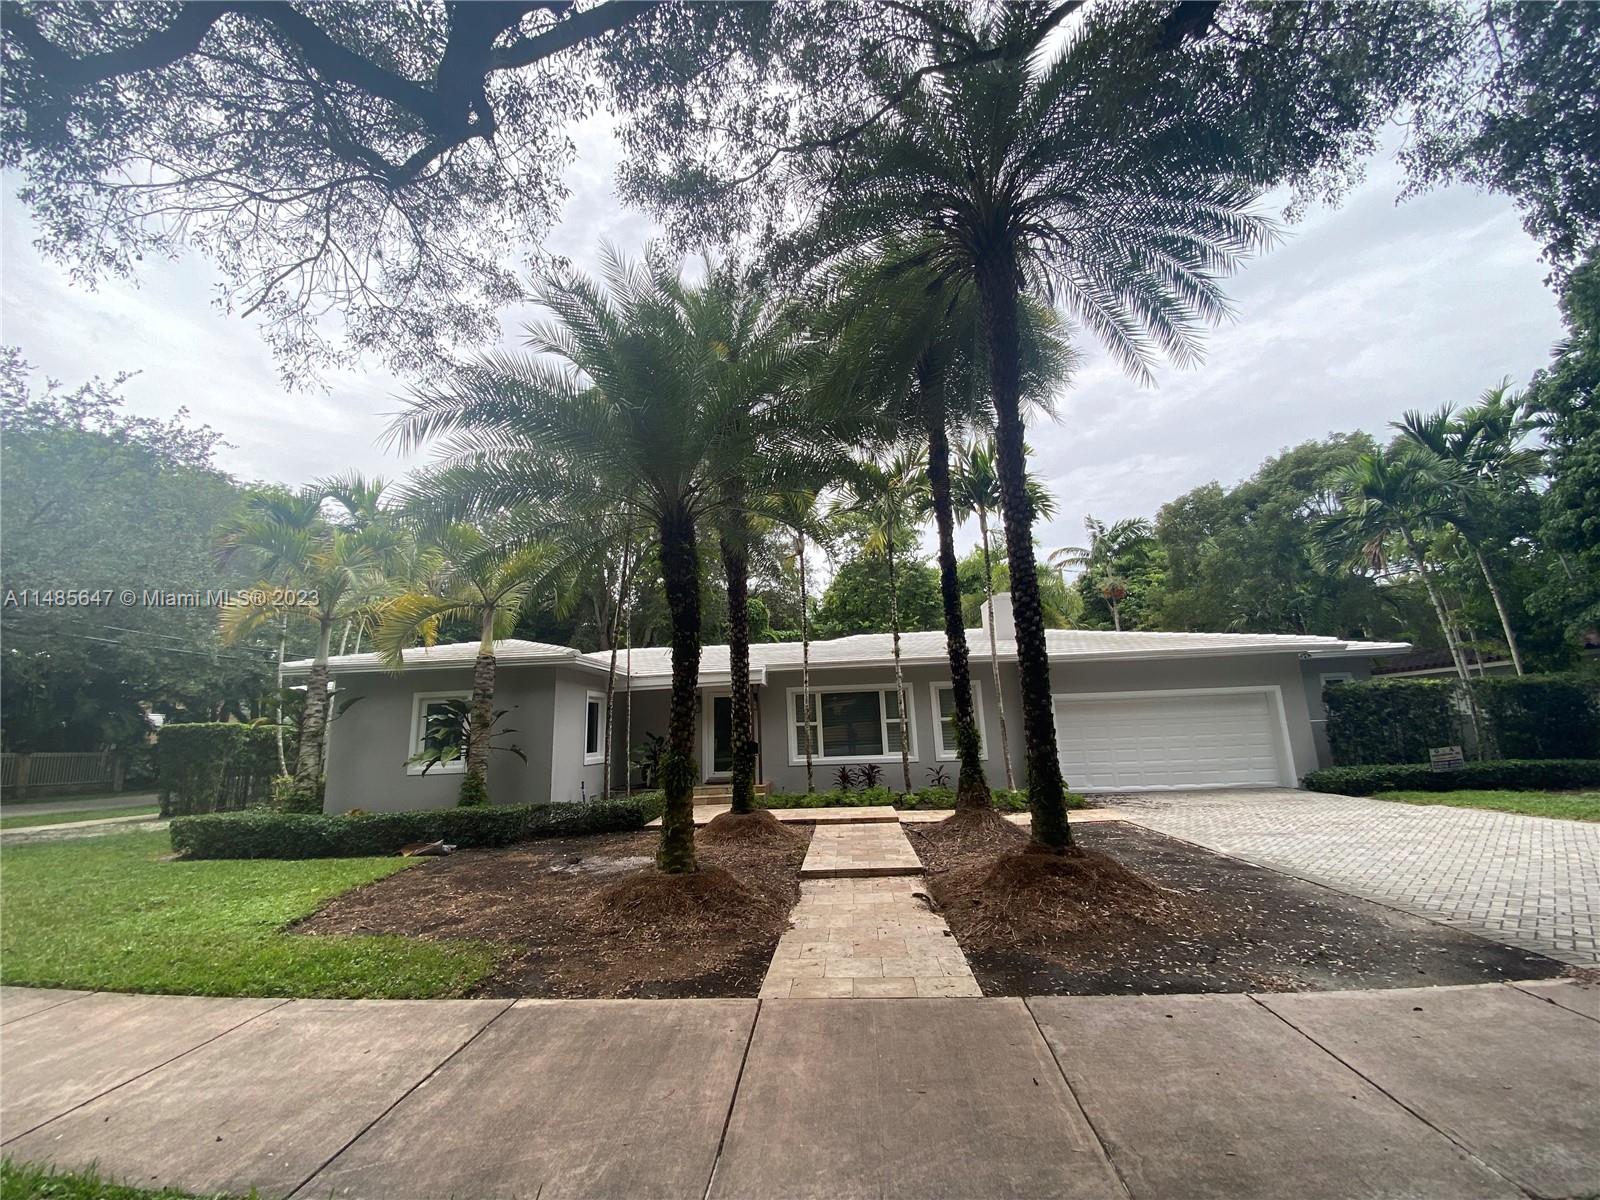 Perfectly situated in Coral Gables, this stunning 5-bedroom, 5 bathroom 1/2 half bathroom home has undergone a complete remodel (3,880sqf). Impact windows, natural light, huge master, plenty of closet space, modern kitchen, everything new. Surrounded by the best private schools. Corner lot 13,125 Sq.Ft .